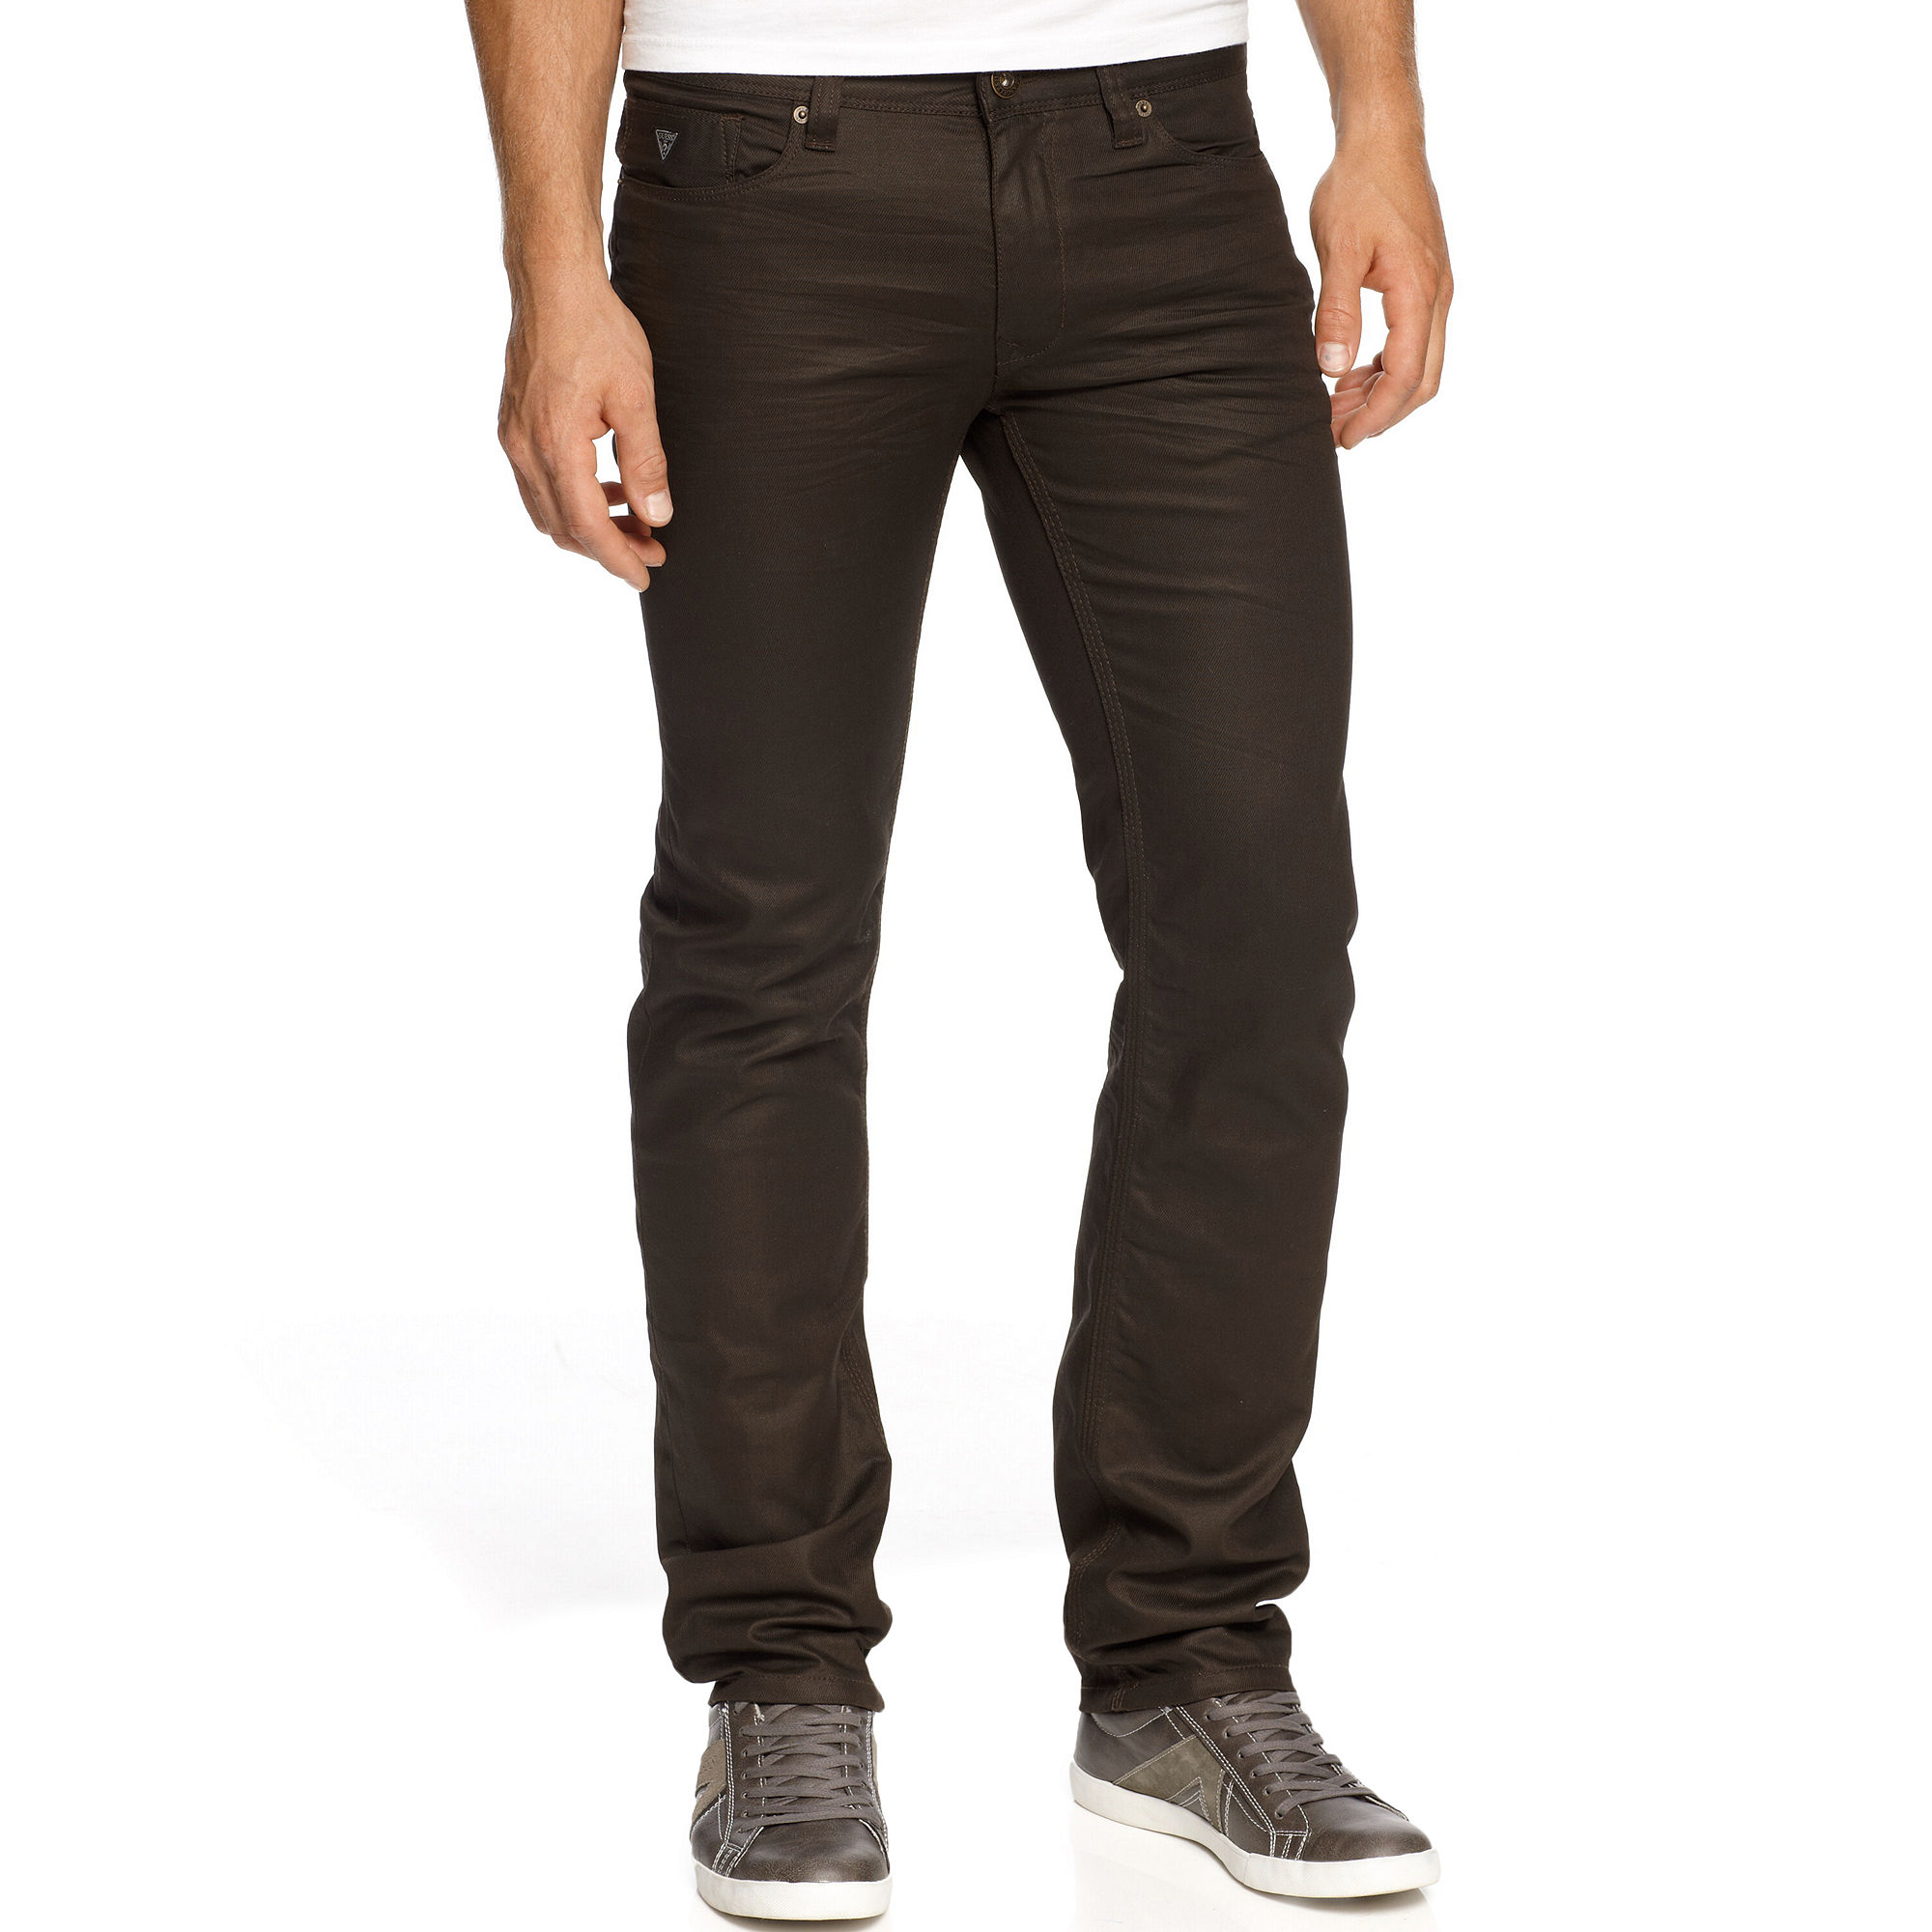 Guess Lincoln Coated Darkwash Denim Jeans in Brown for Men - Lyst